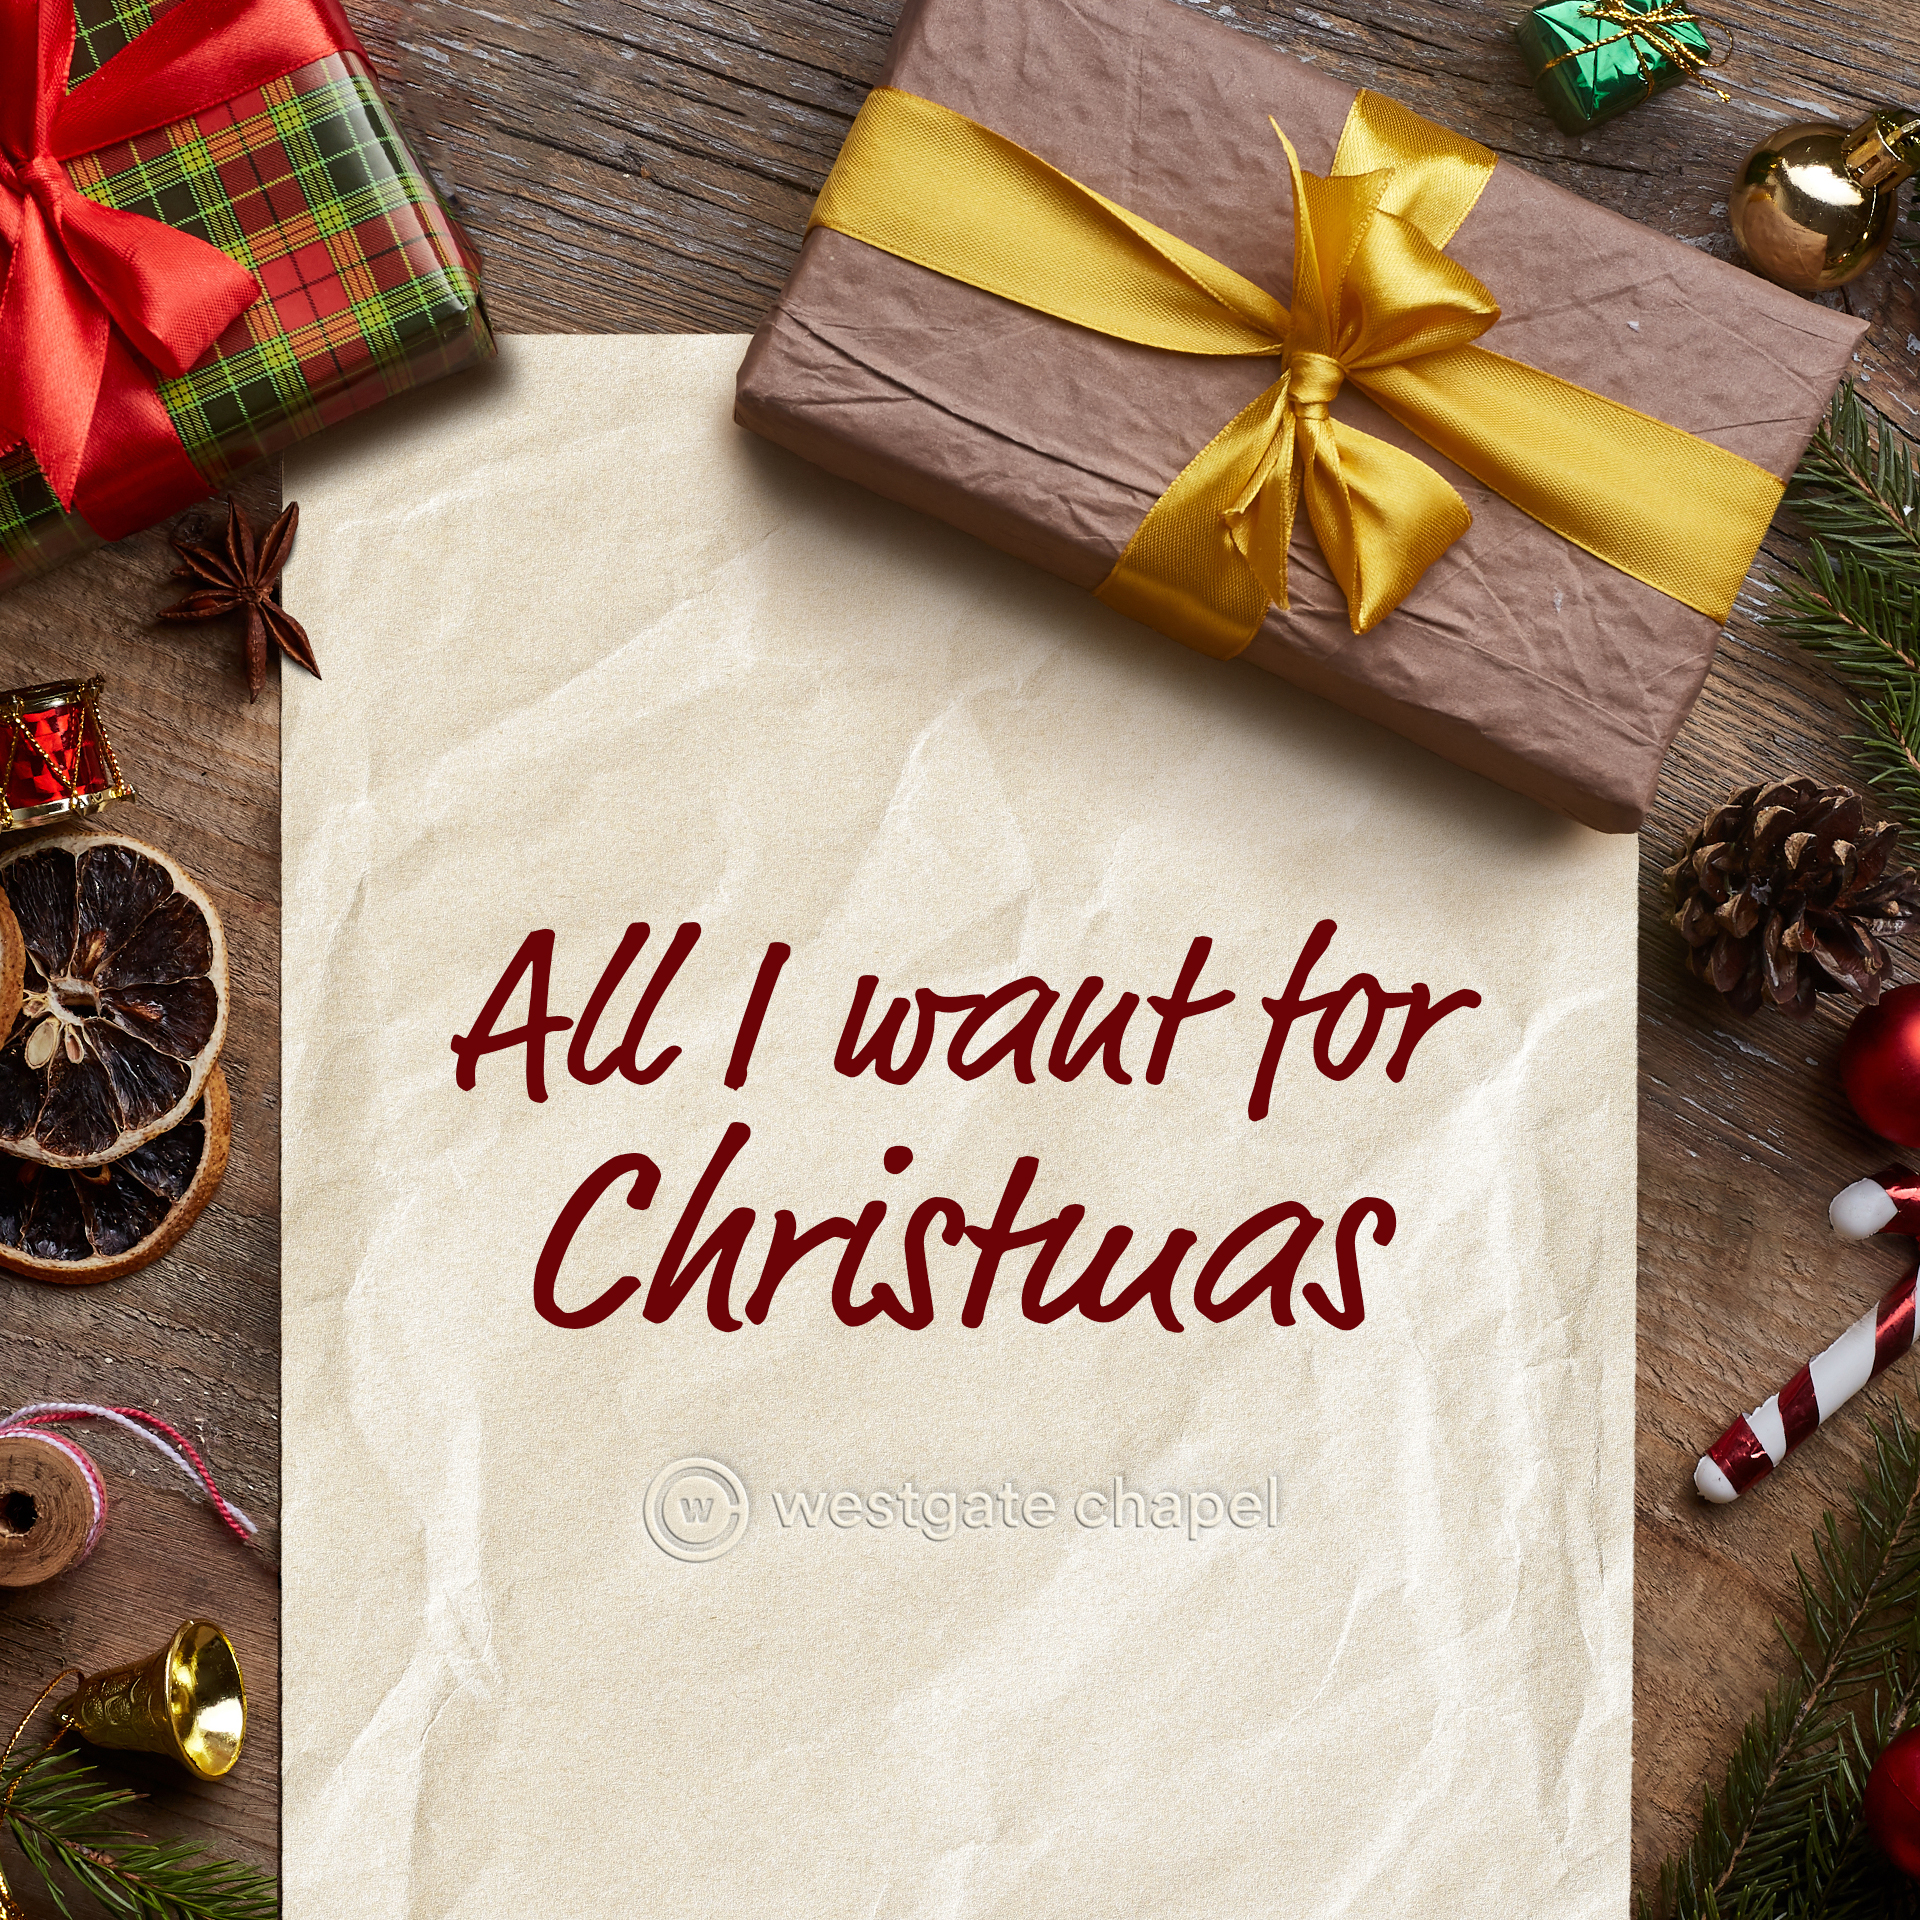 All I Want For Christmas - Search For Significance and Purpose